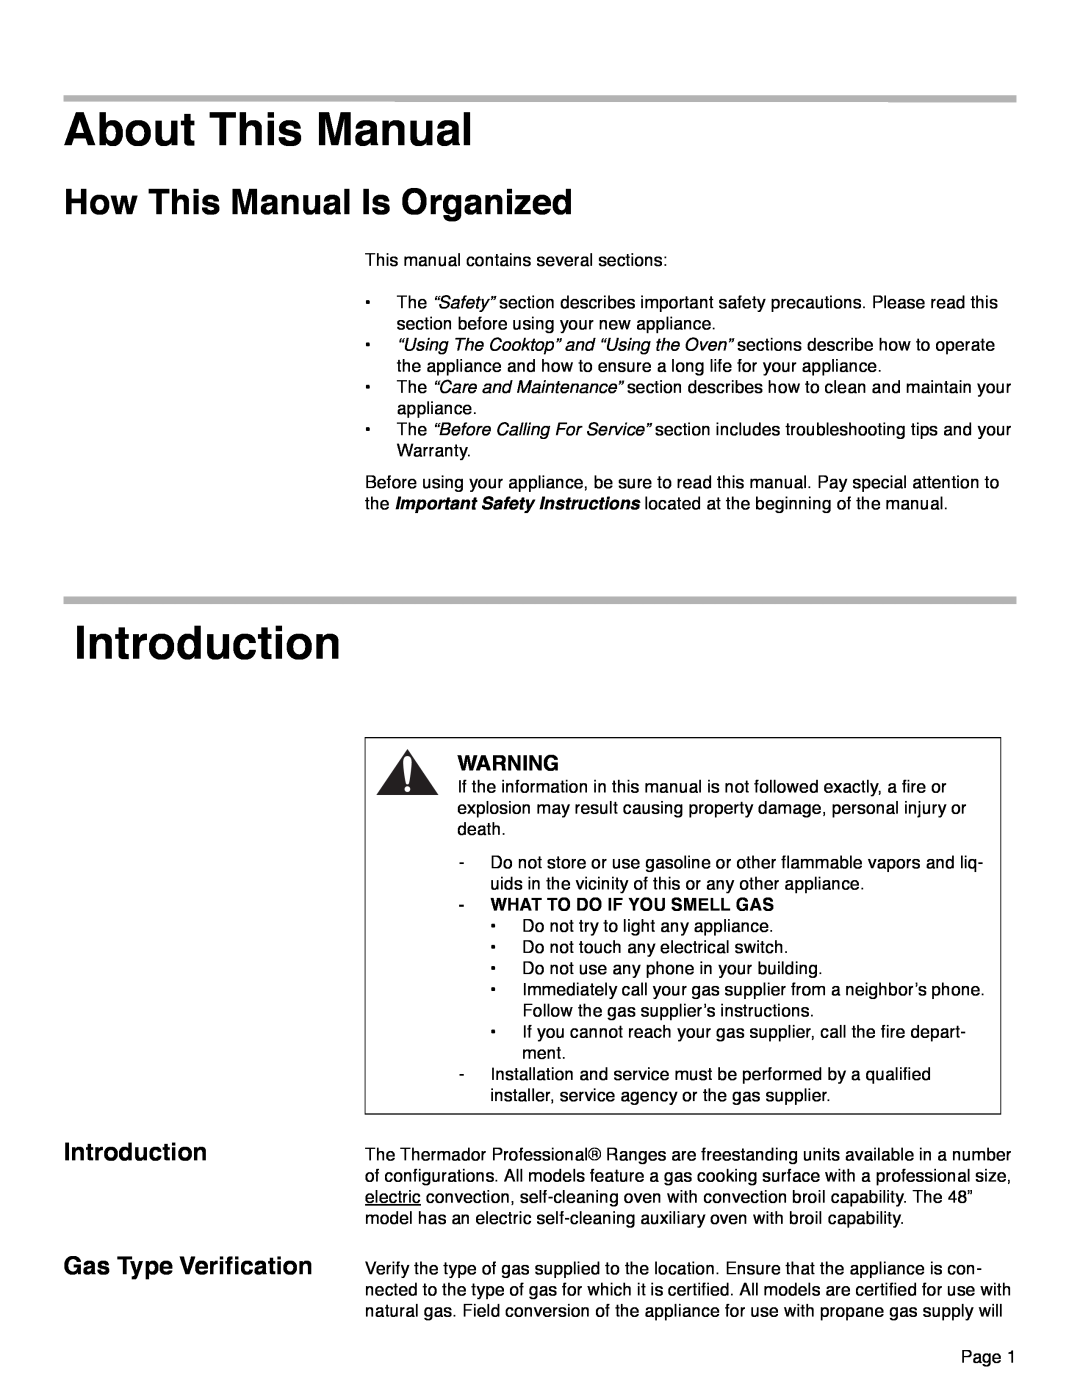 Thermador PRD36, PRD48, PRD30 manual About This Manual, How This Manual Is Organized, Introduction Gas Type Verification 